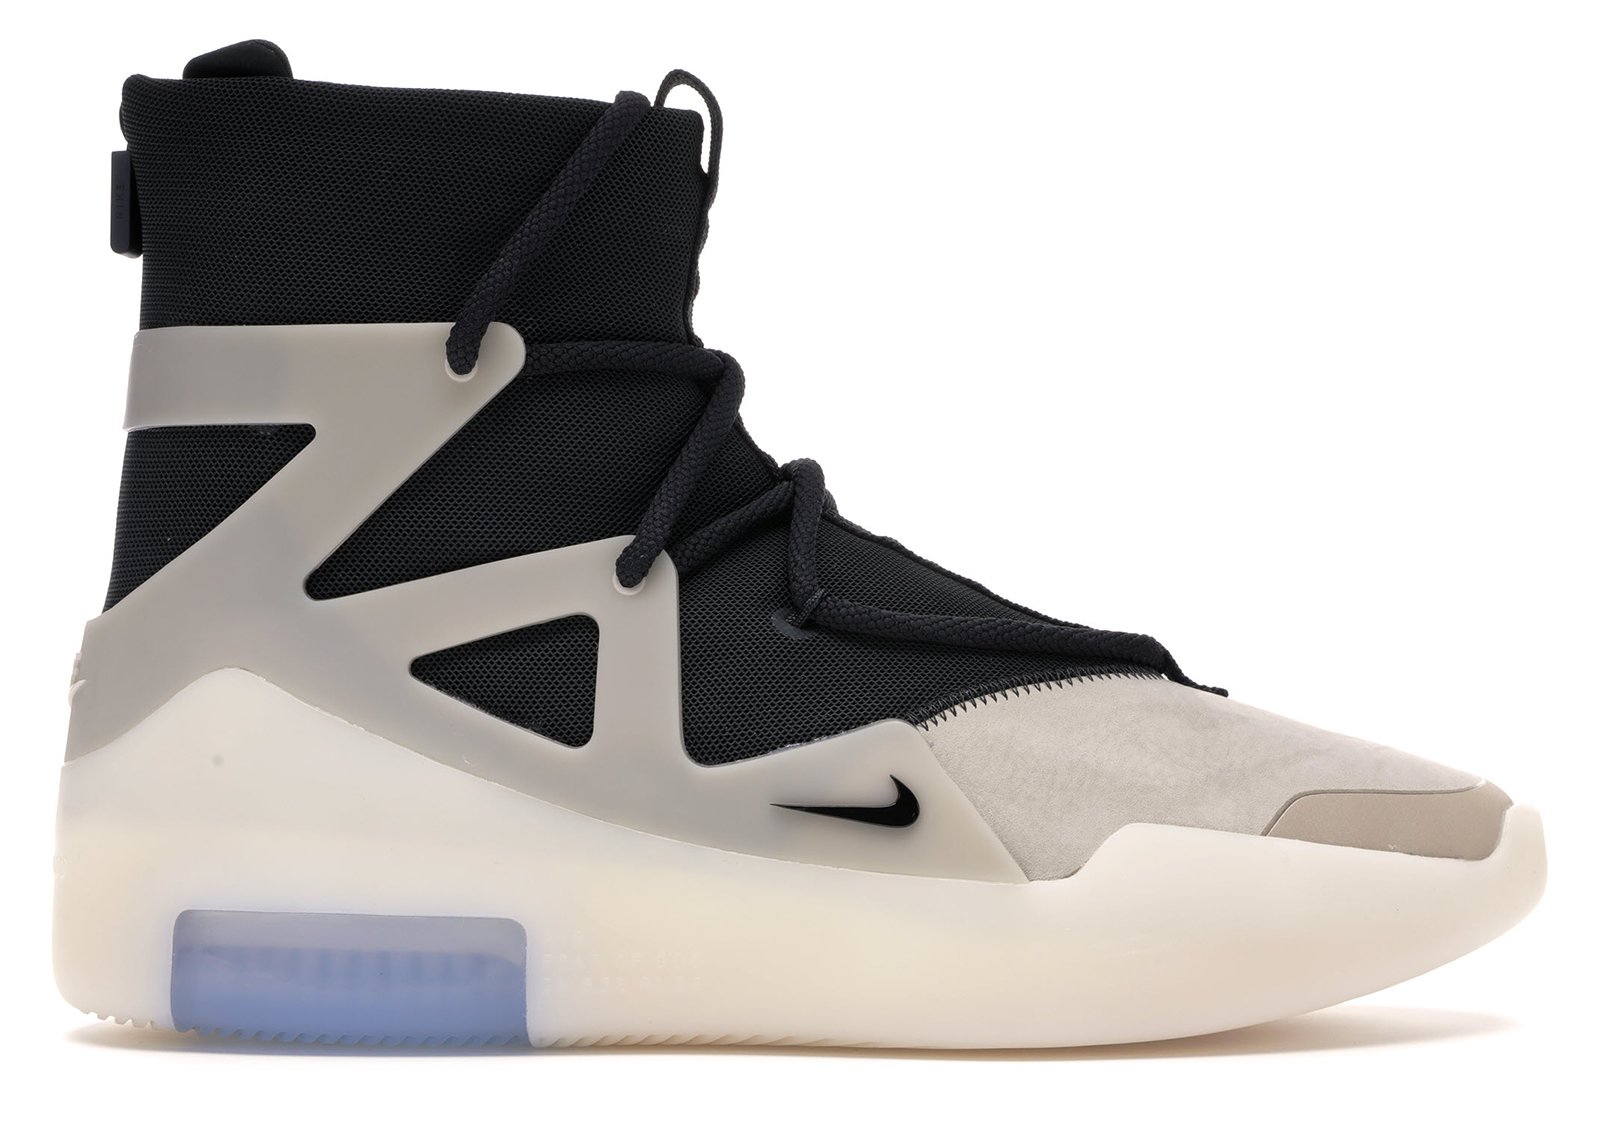 Nike Air Fear of God 1 String The Question sneakers